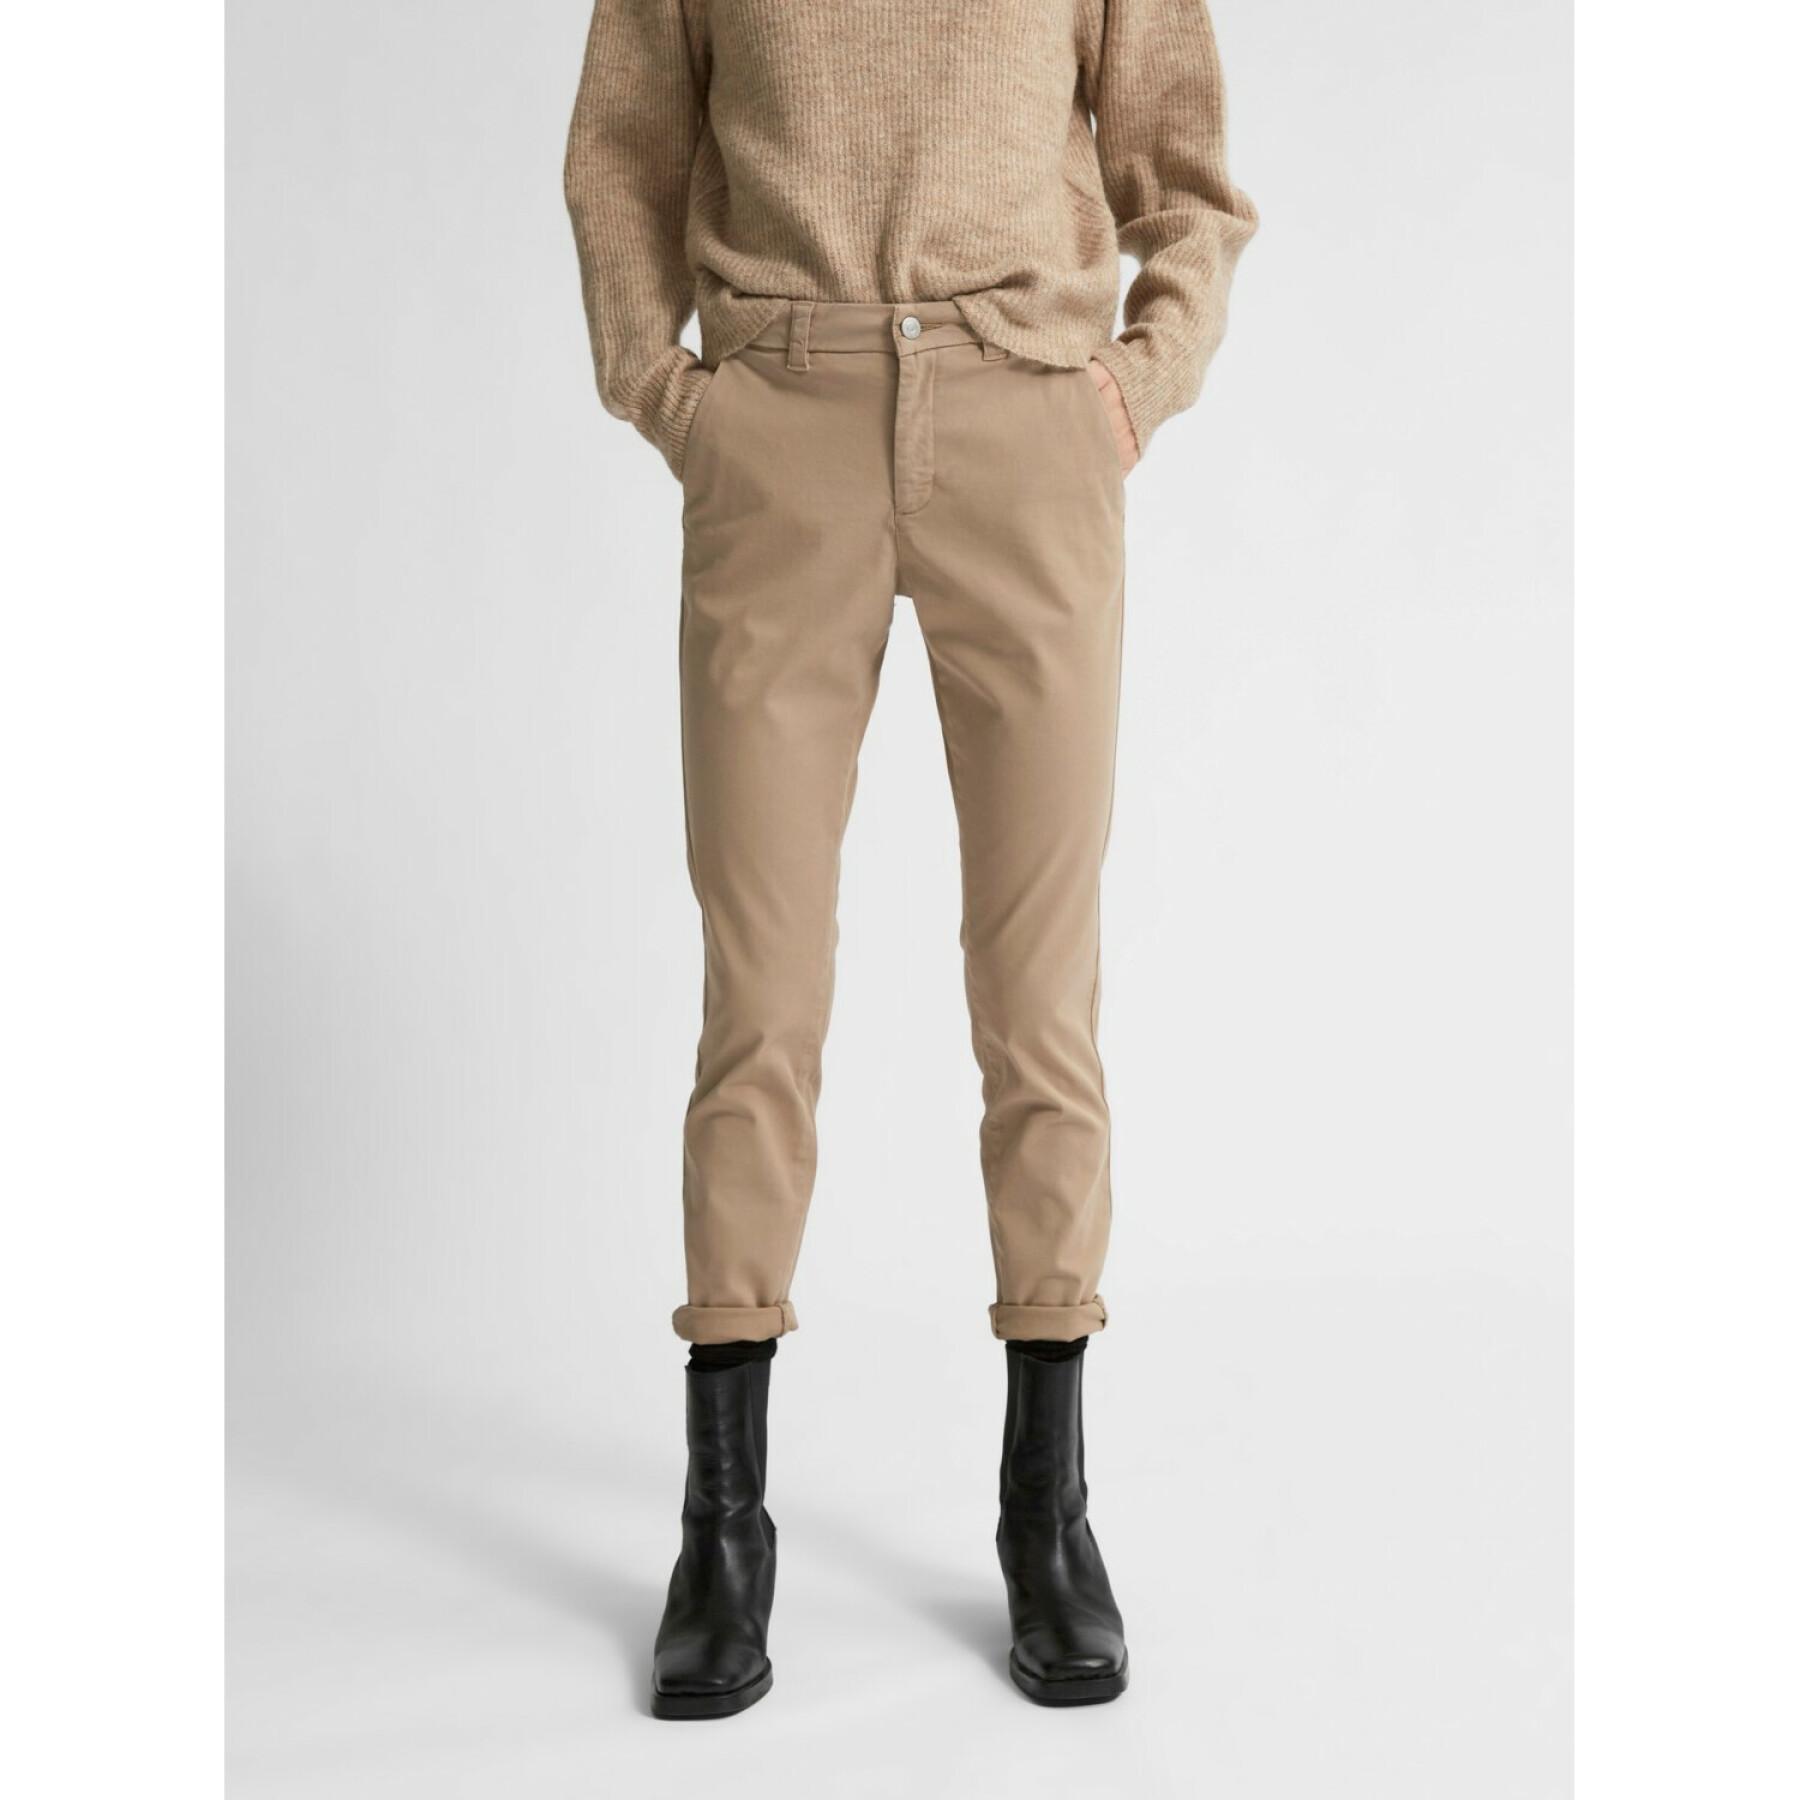 Women's chino pants Selected Miley